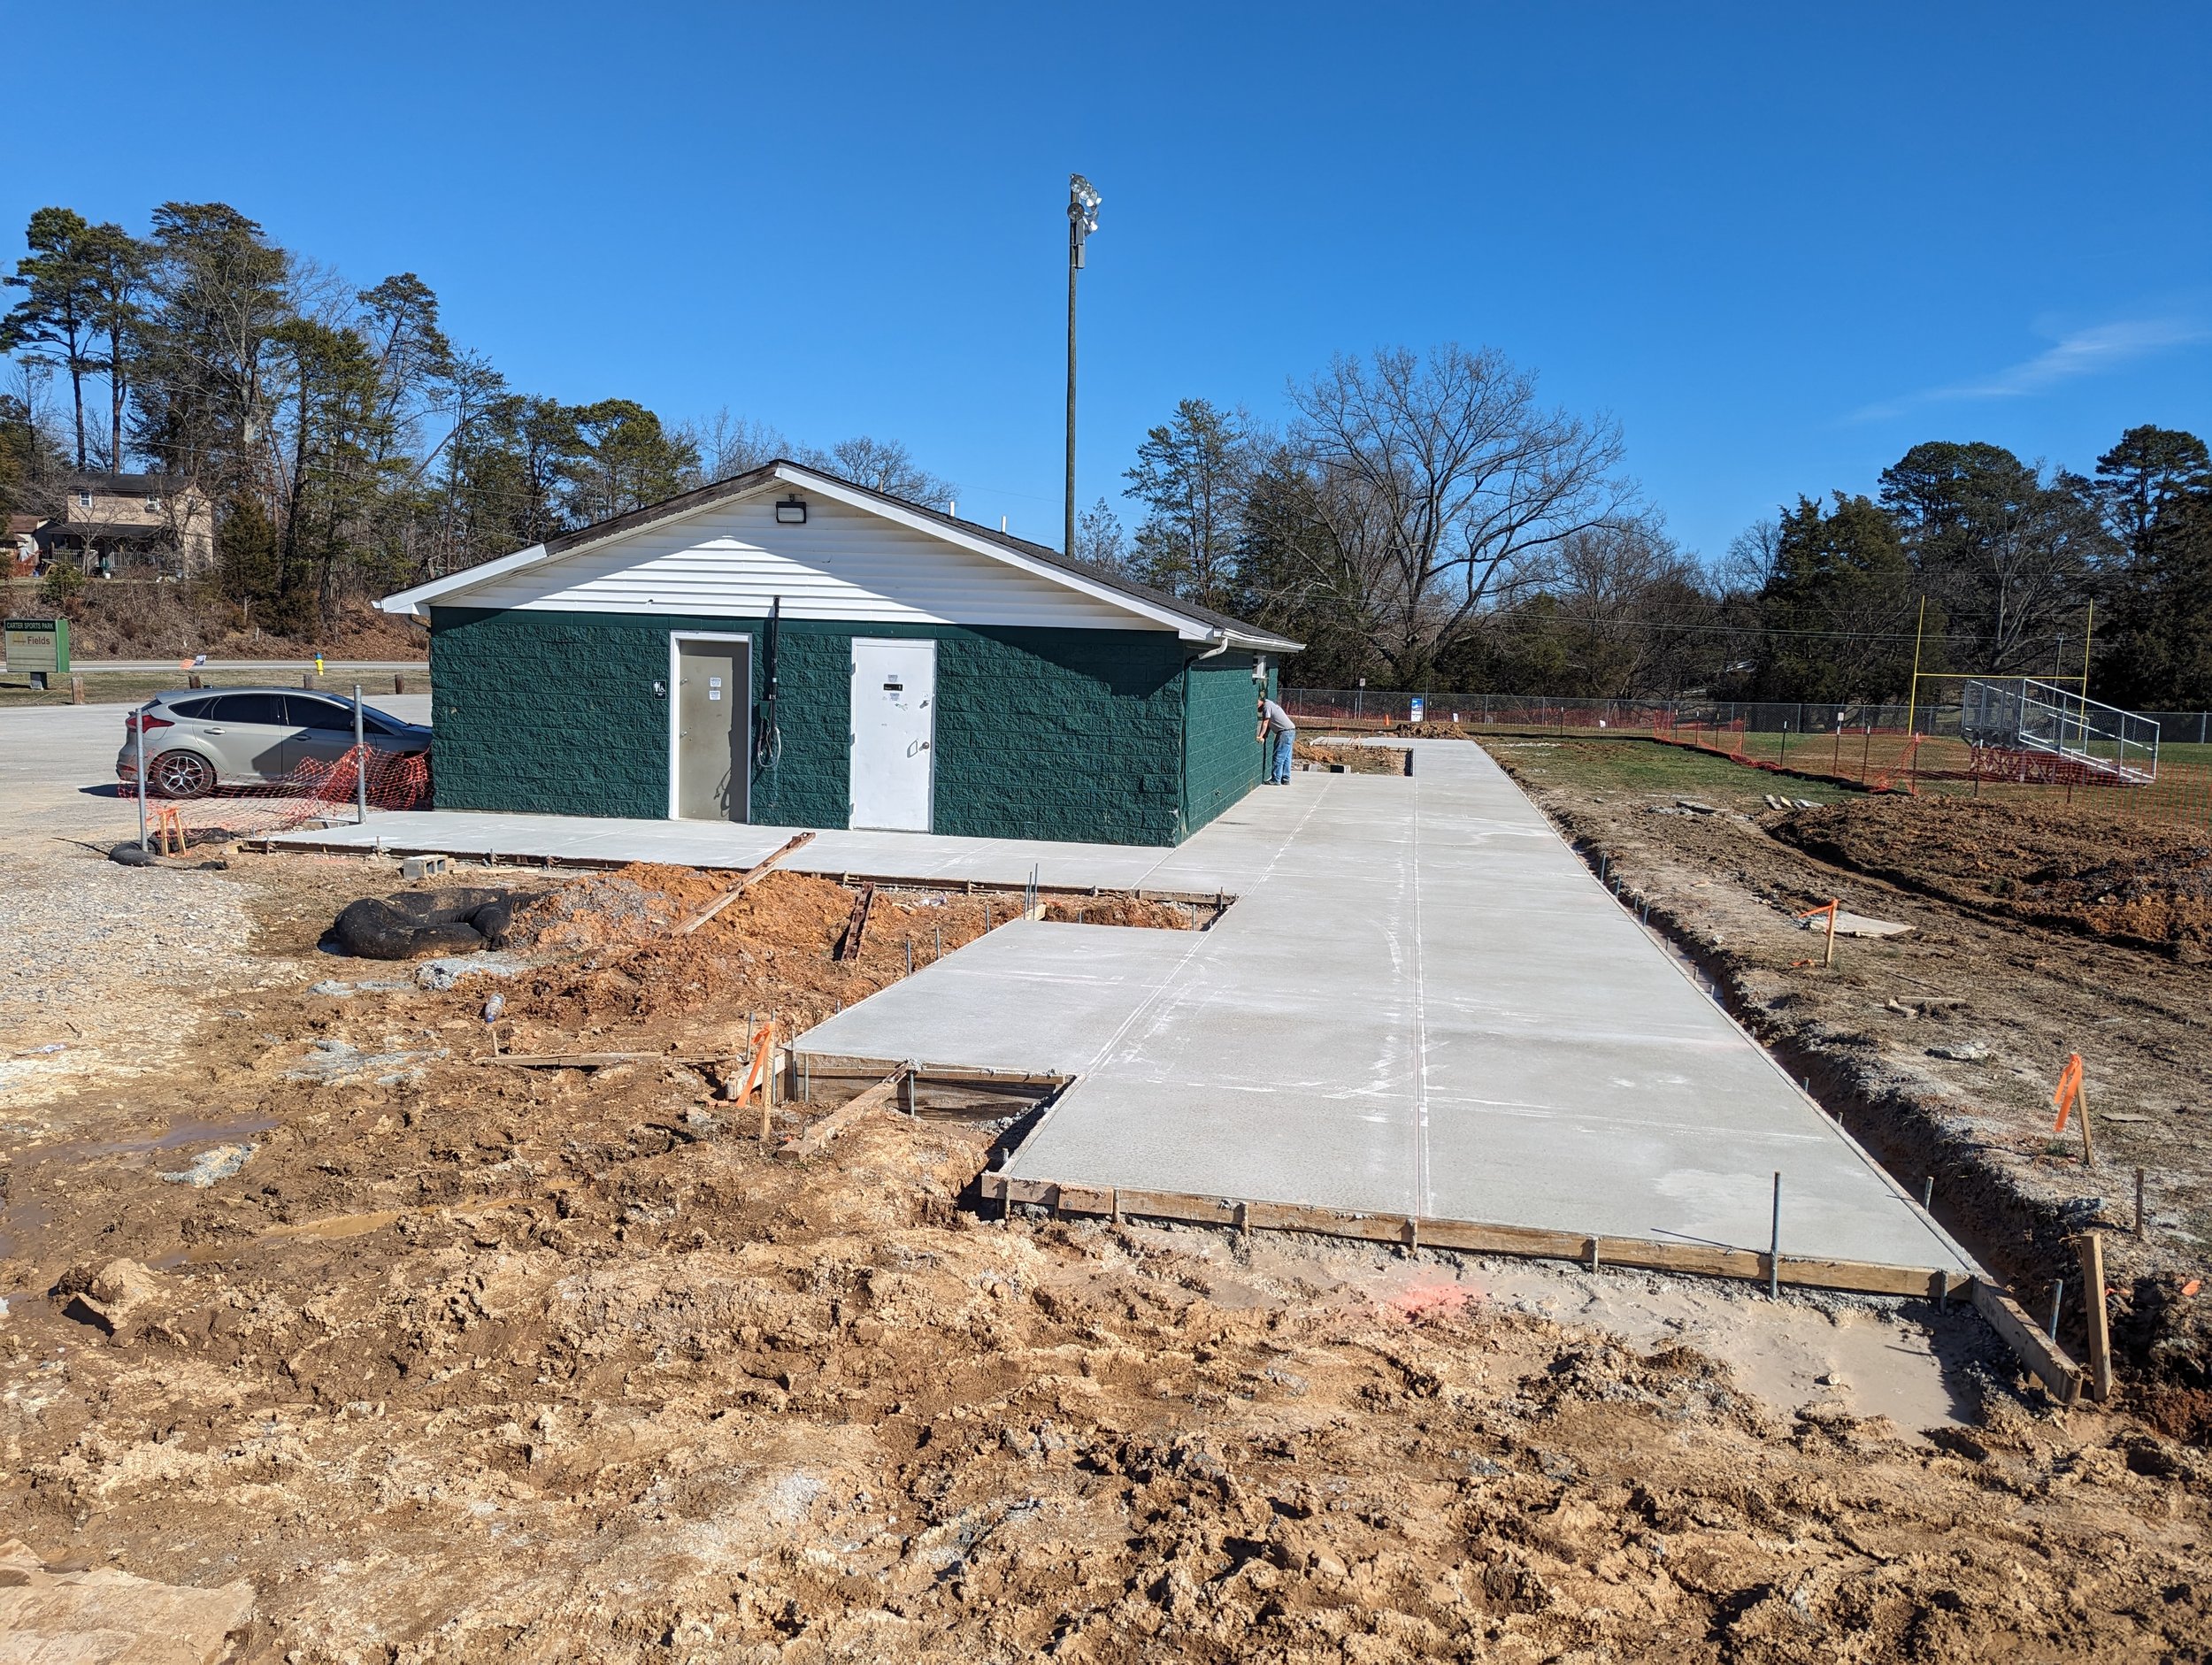 2/15/2024 - Concrete has been poured for the Football Field restrooms, concessions, and viewing stands.